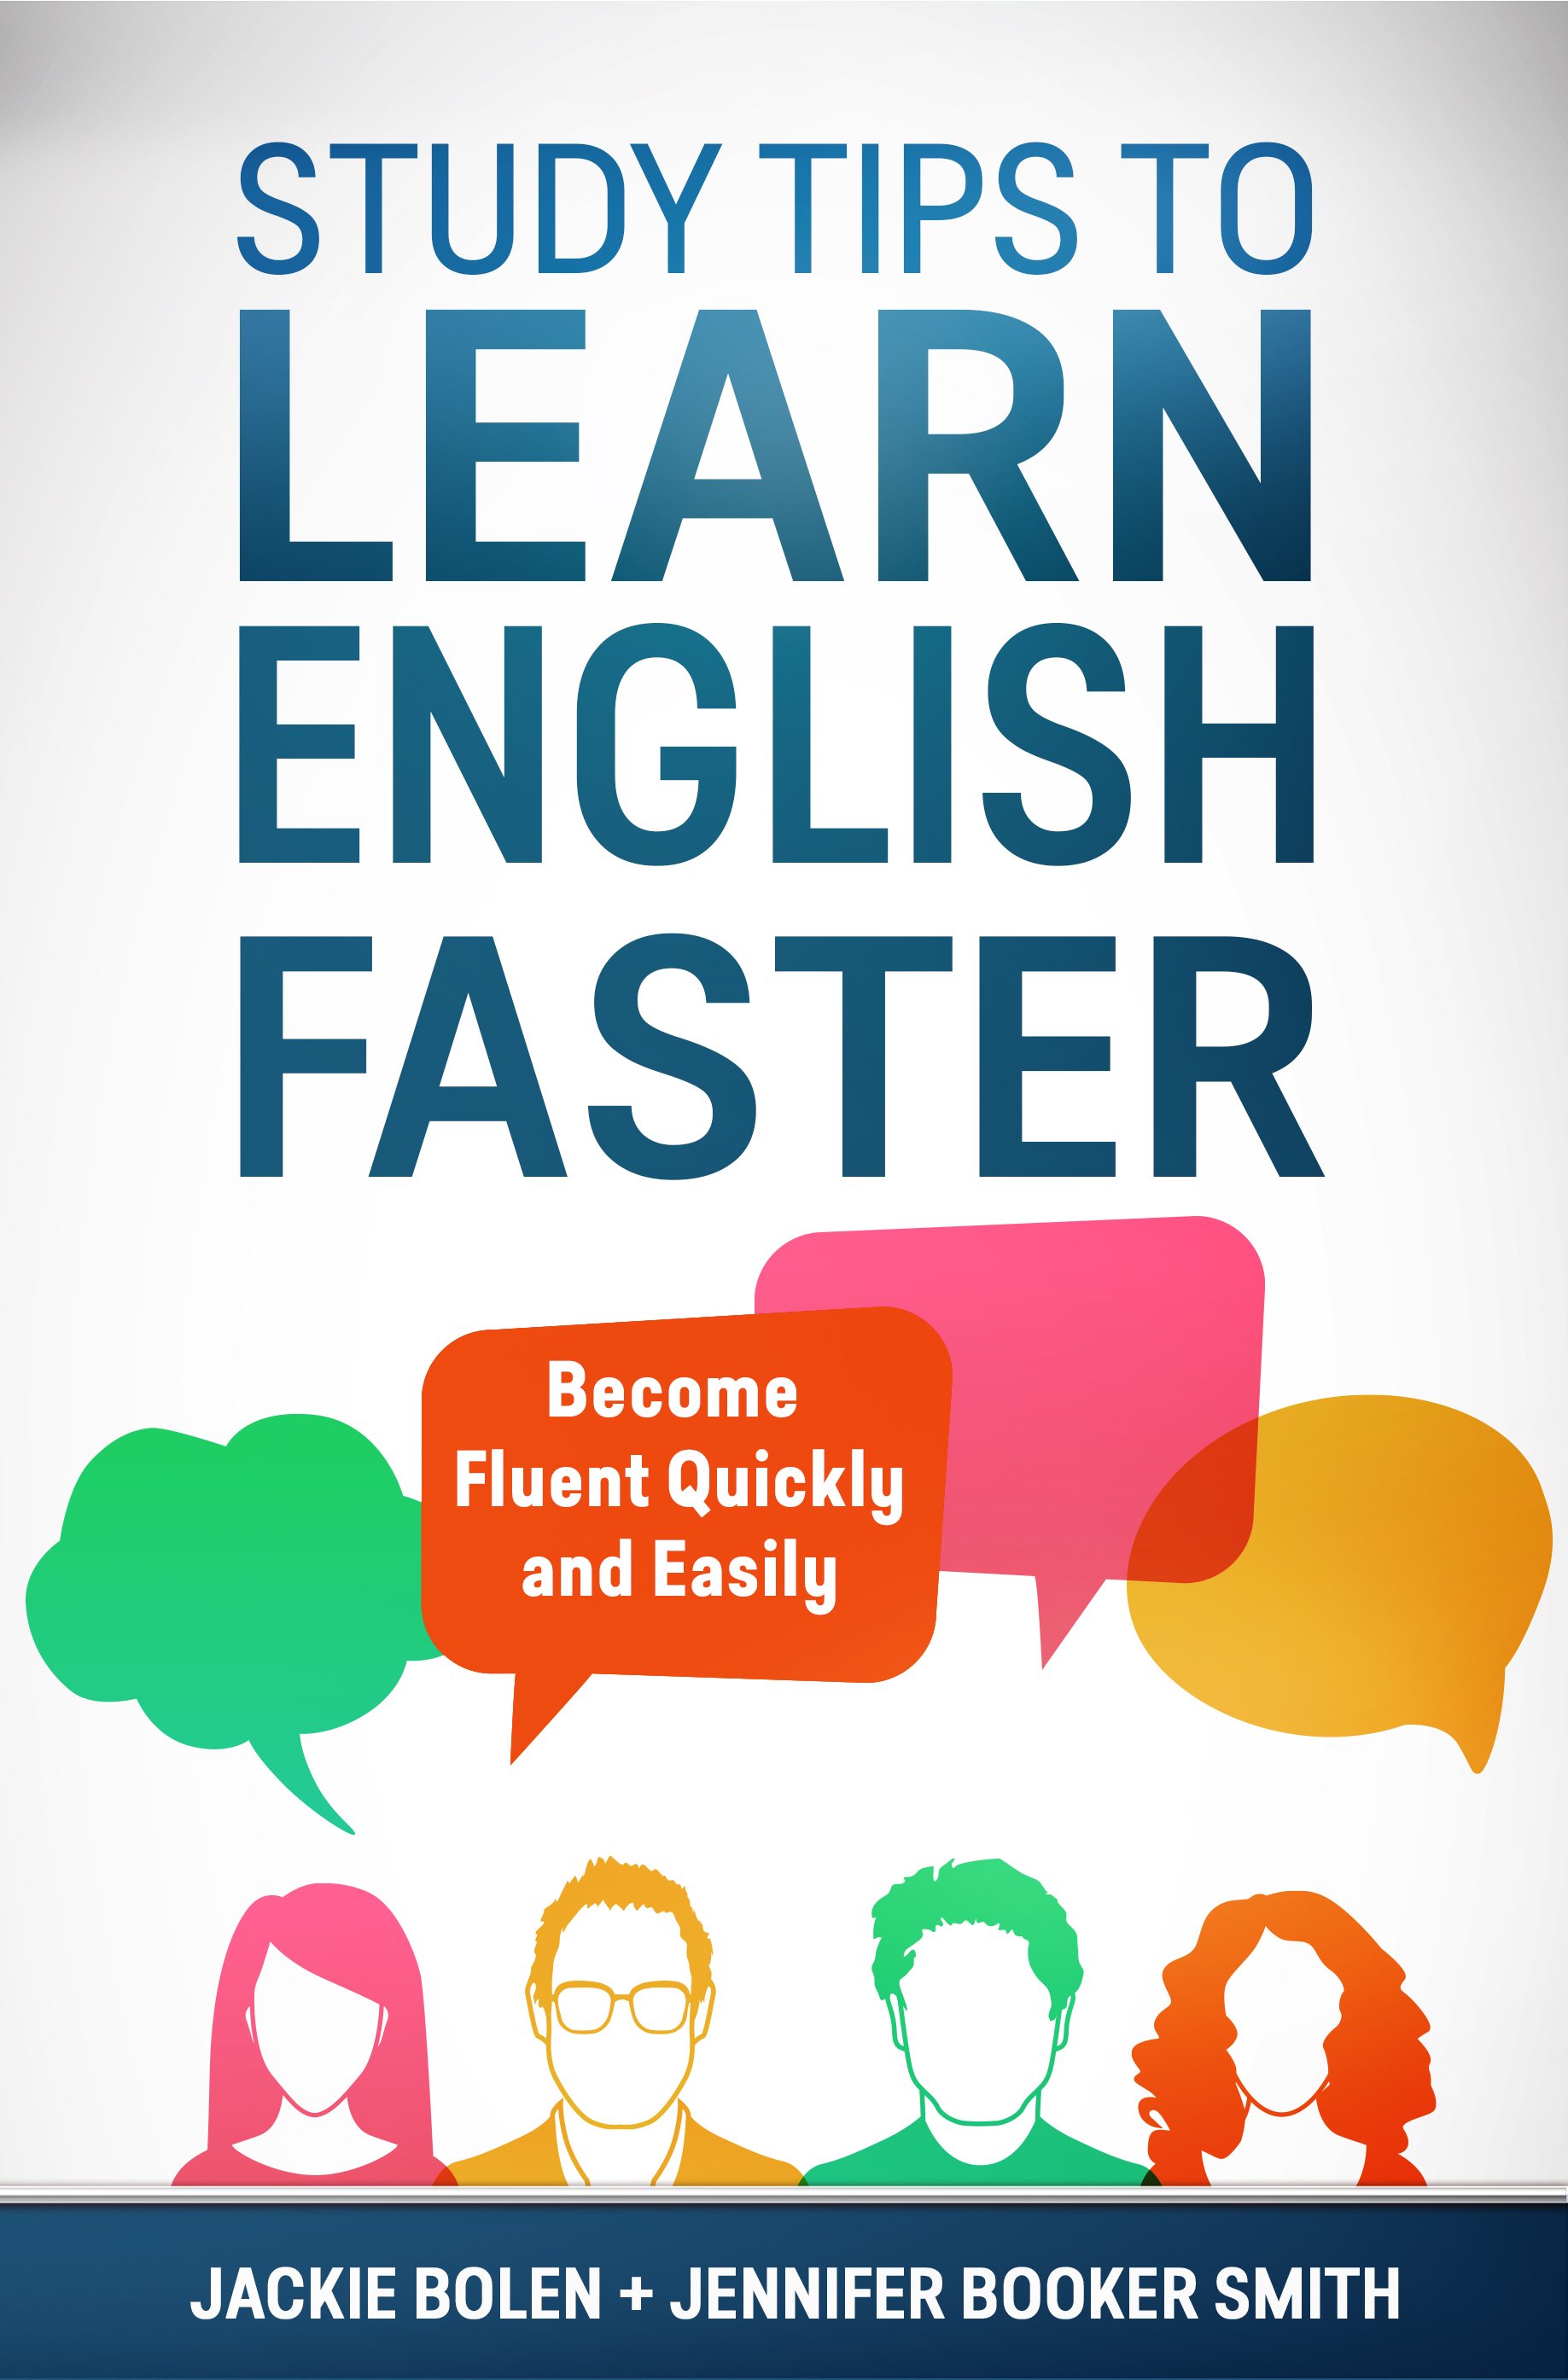 study-tips-to-learn-english-faster-become-fluent-quickly-and-easily